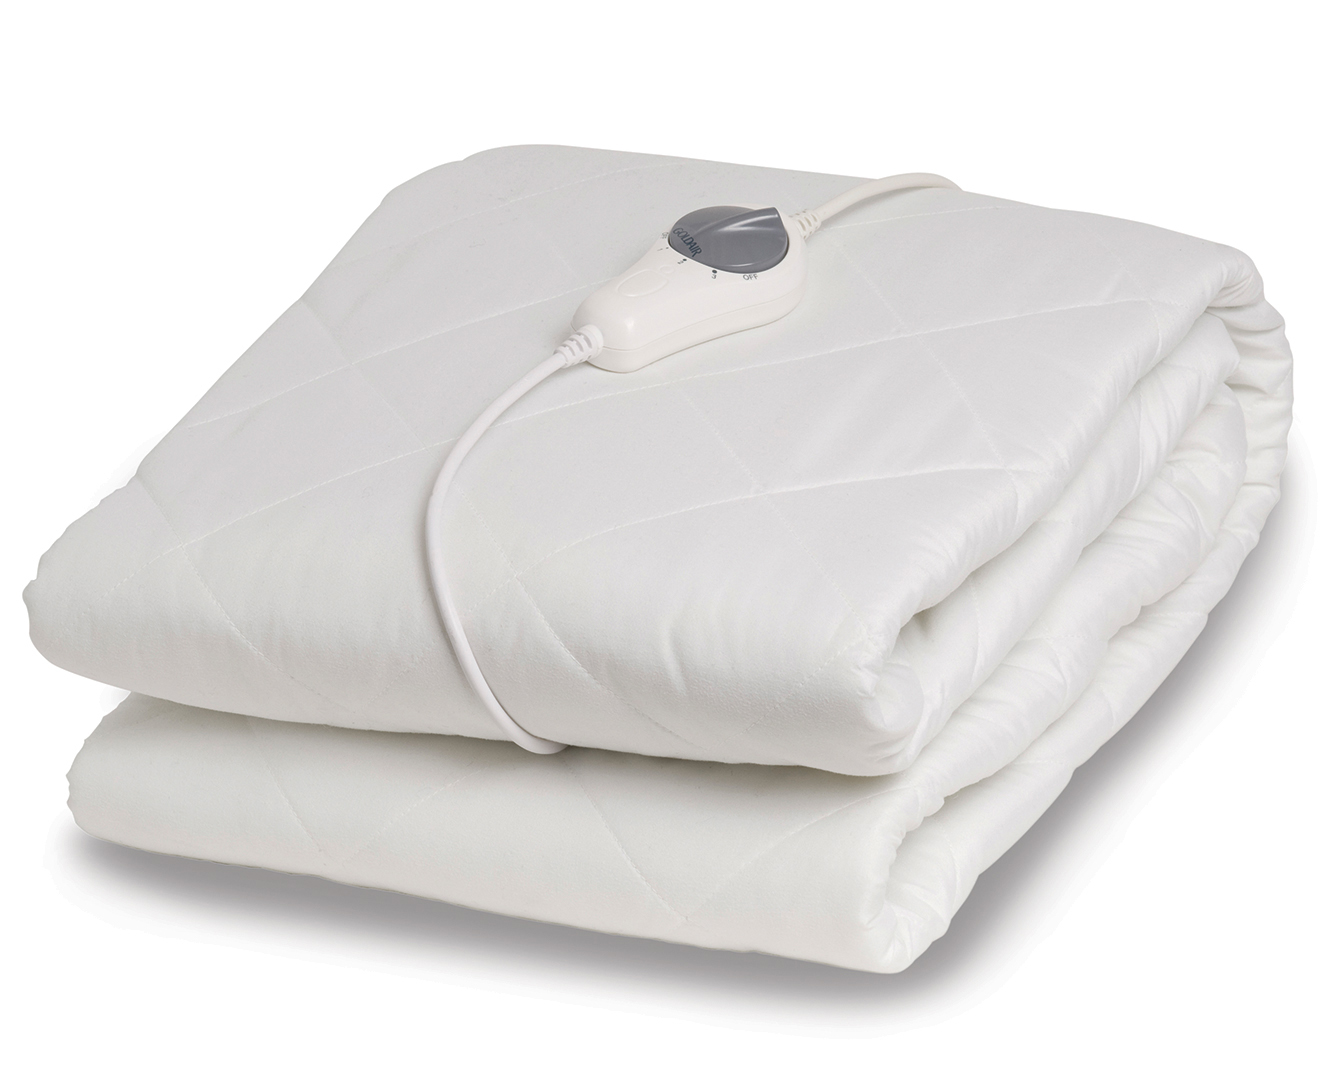 goldair electric blanket with mattress protector